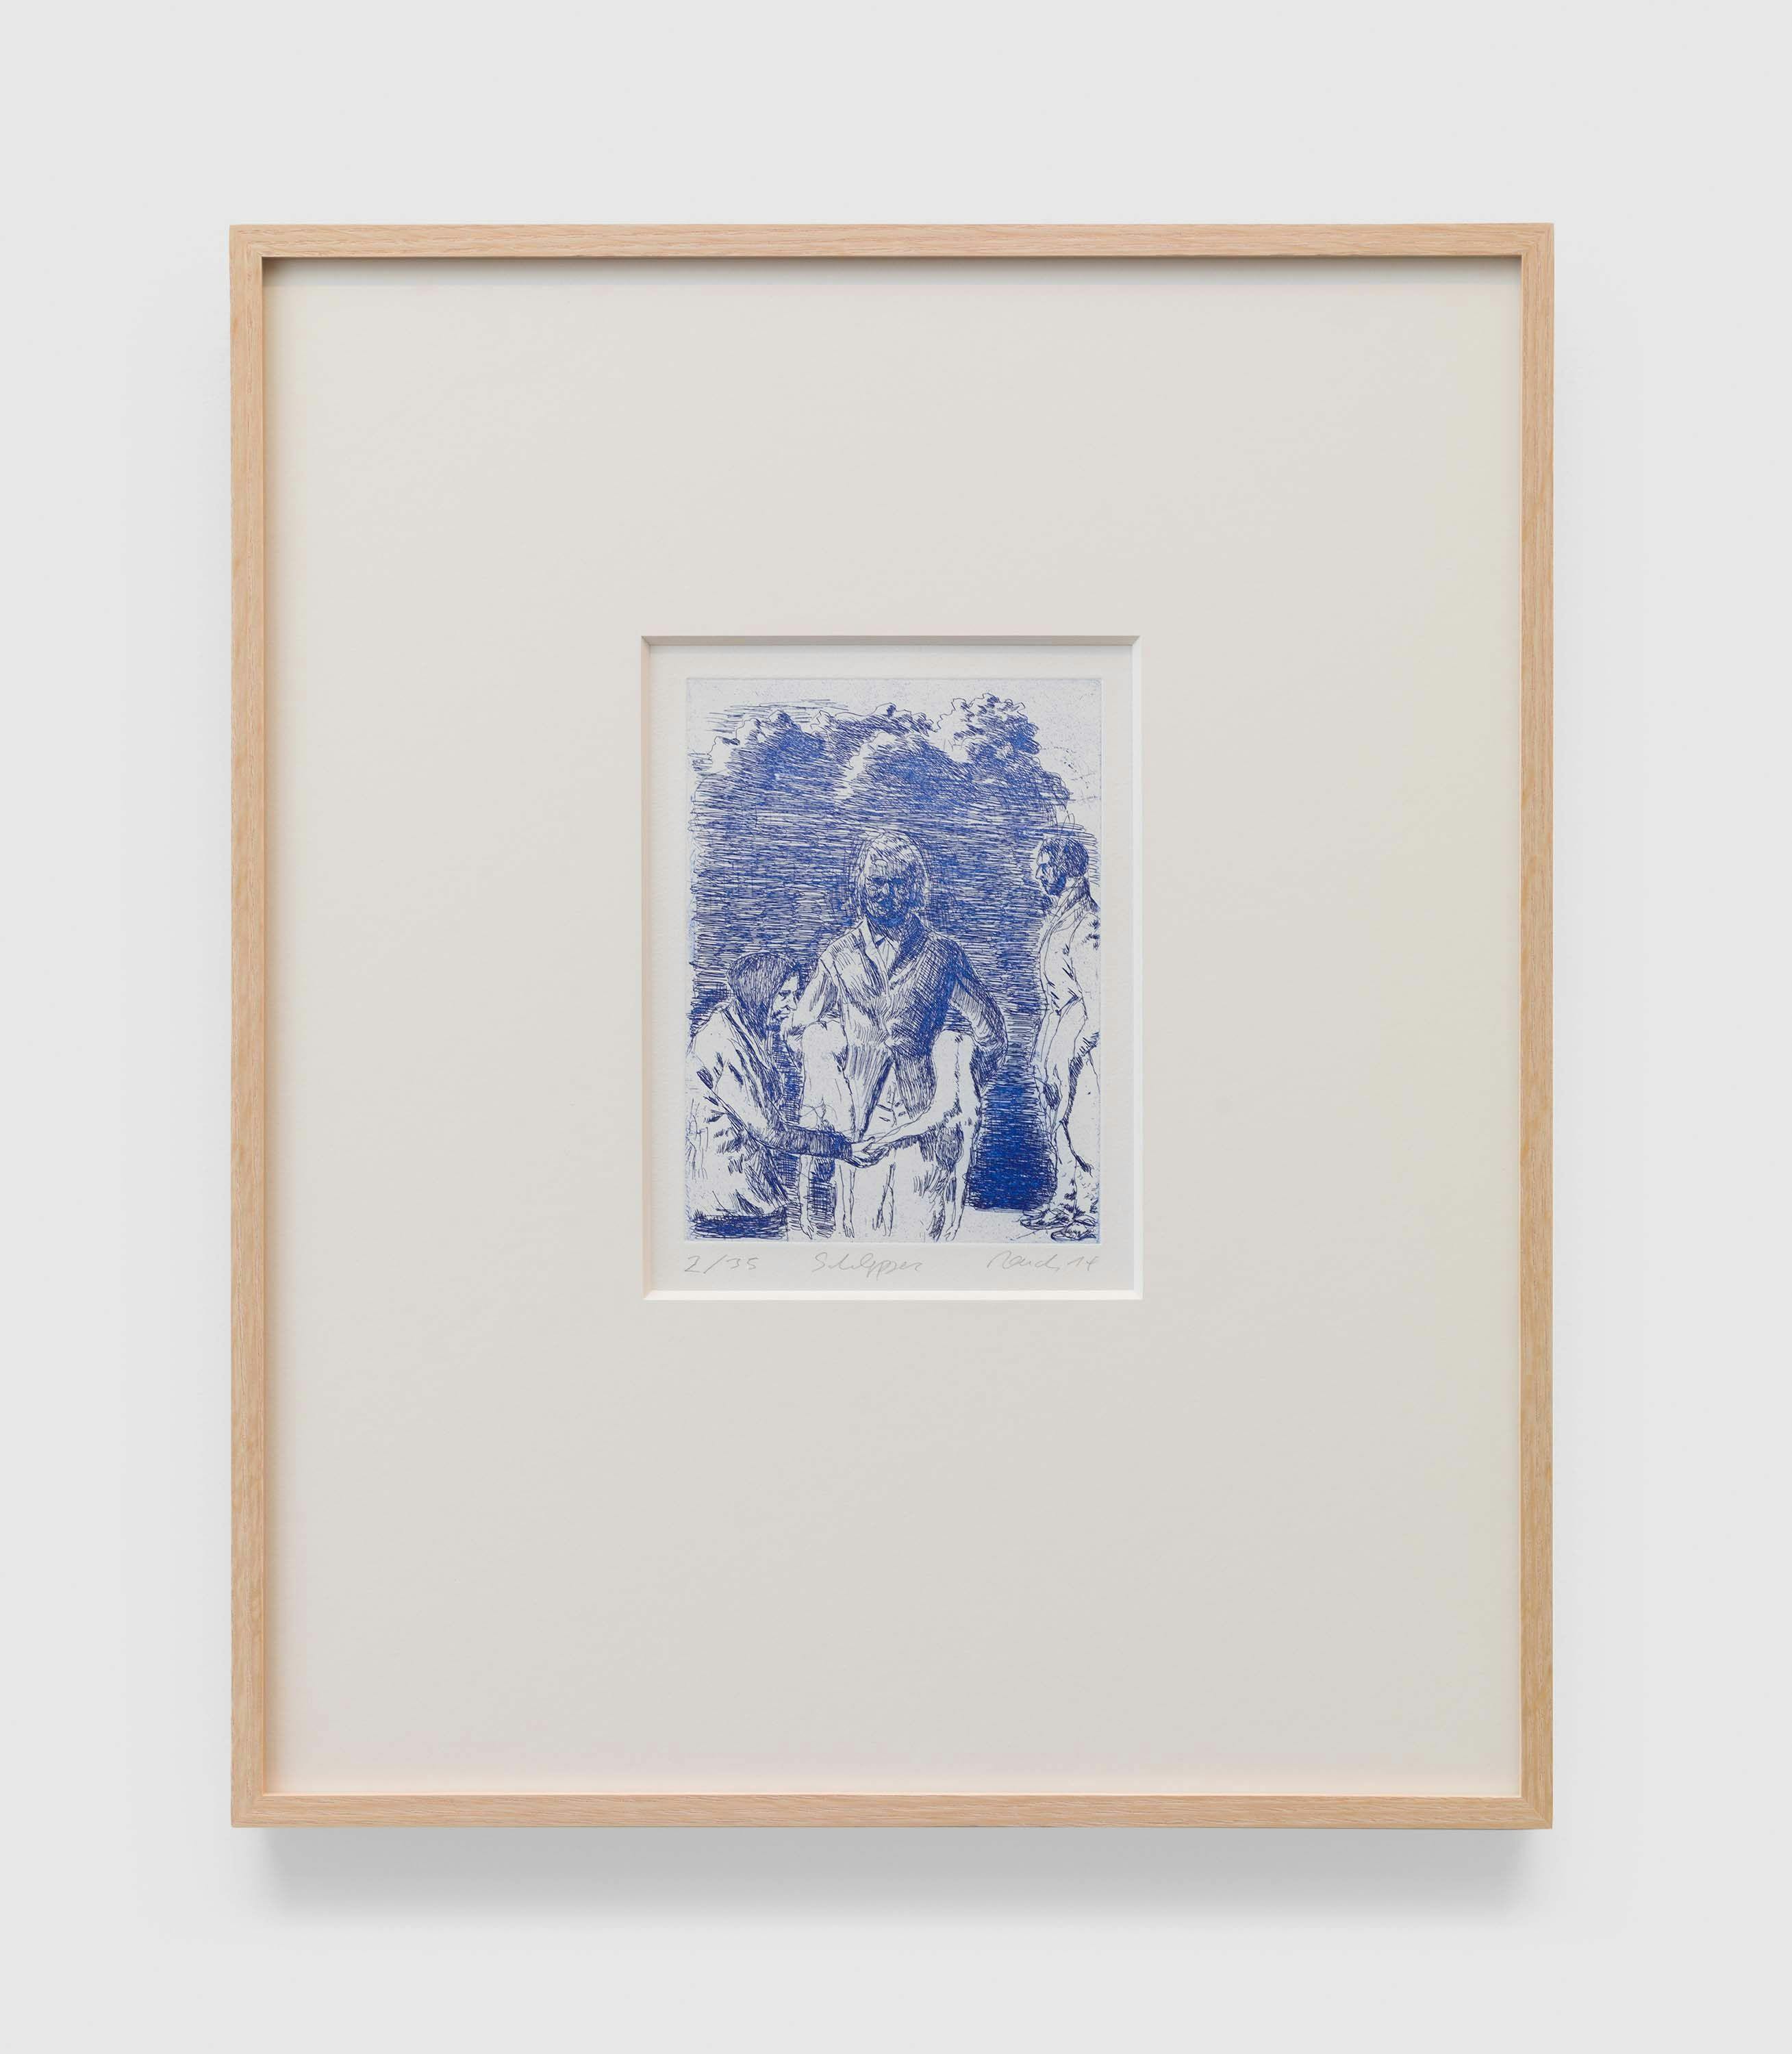 A monochrome etching by Neo Rauch, titled Schlepper, dated 2014.